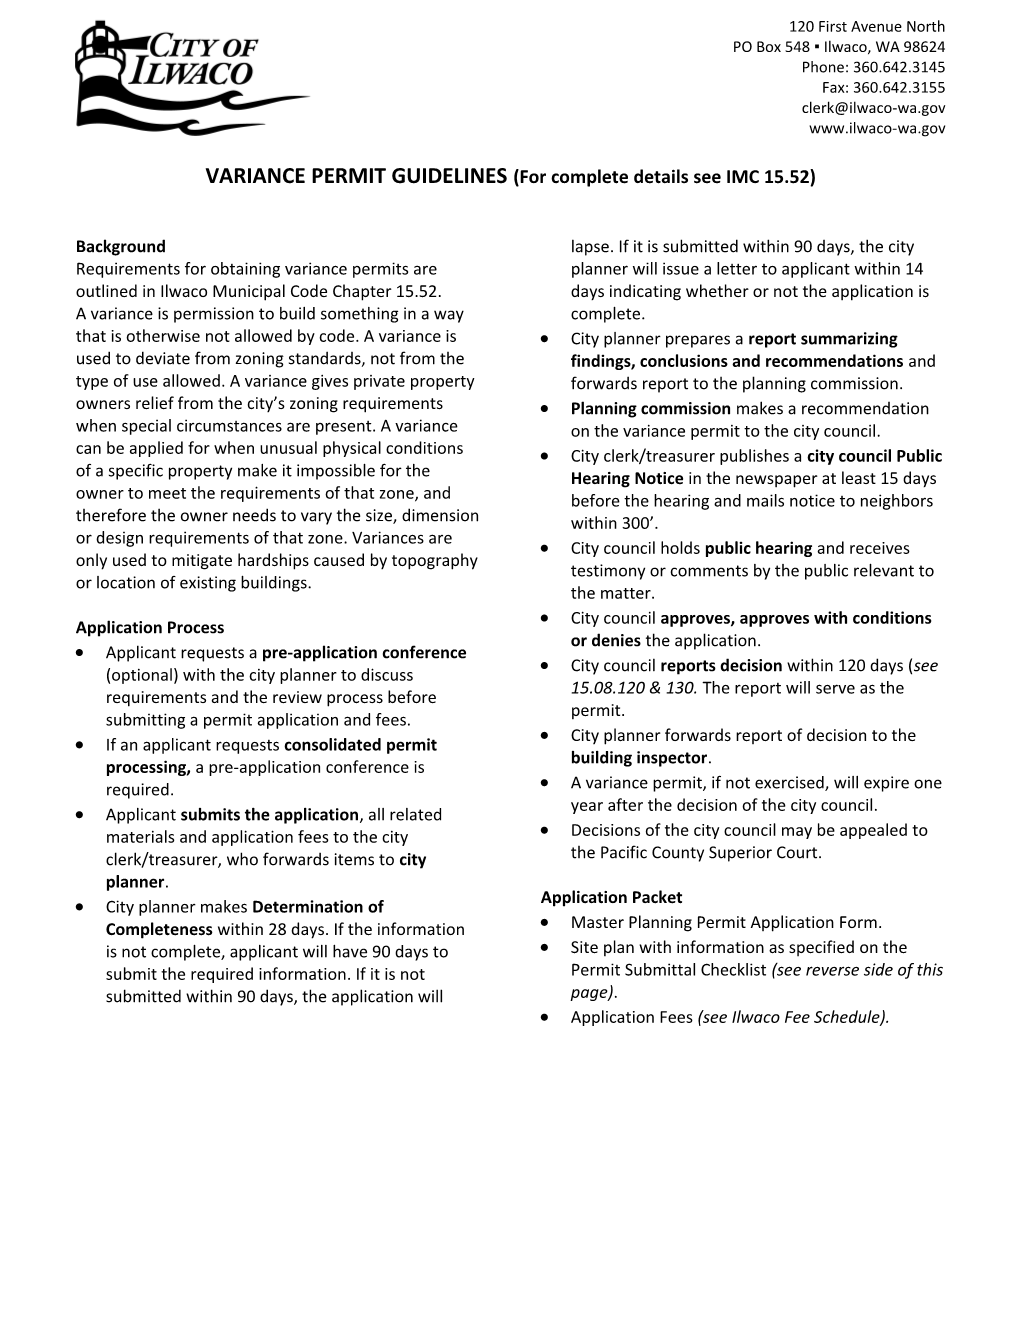 VARIANCE PERMIT GUIDELINES(For Complete Details See IMC 15.52)